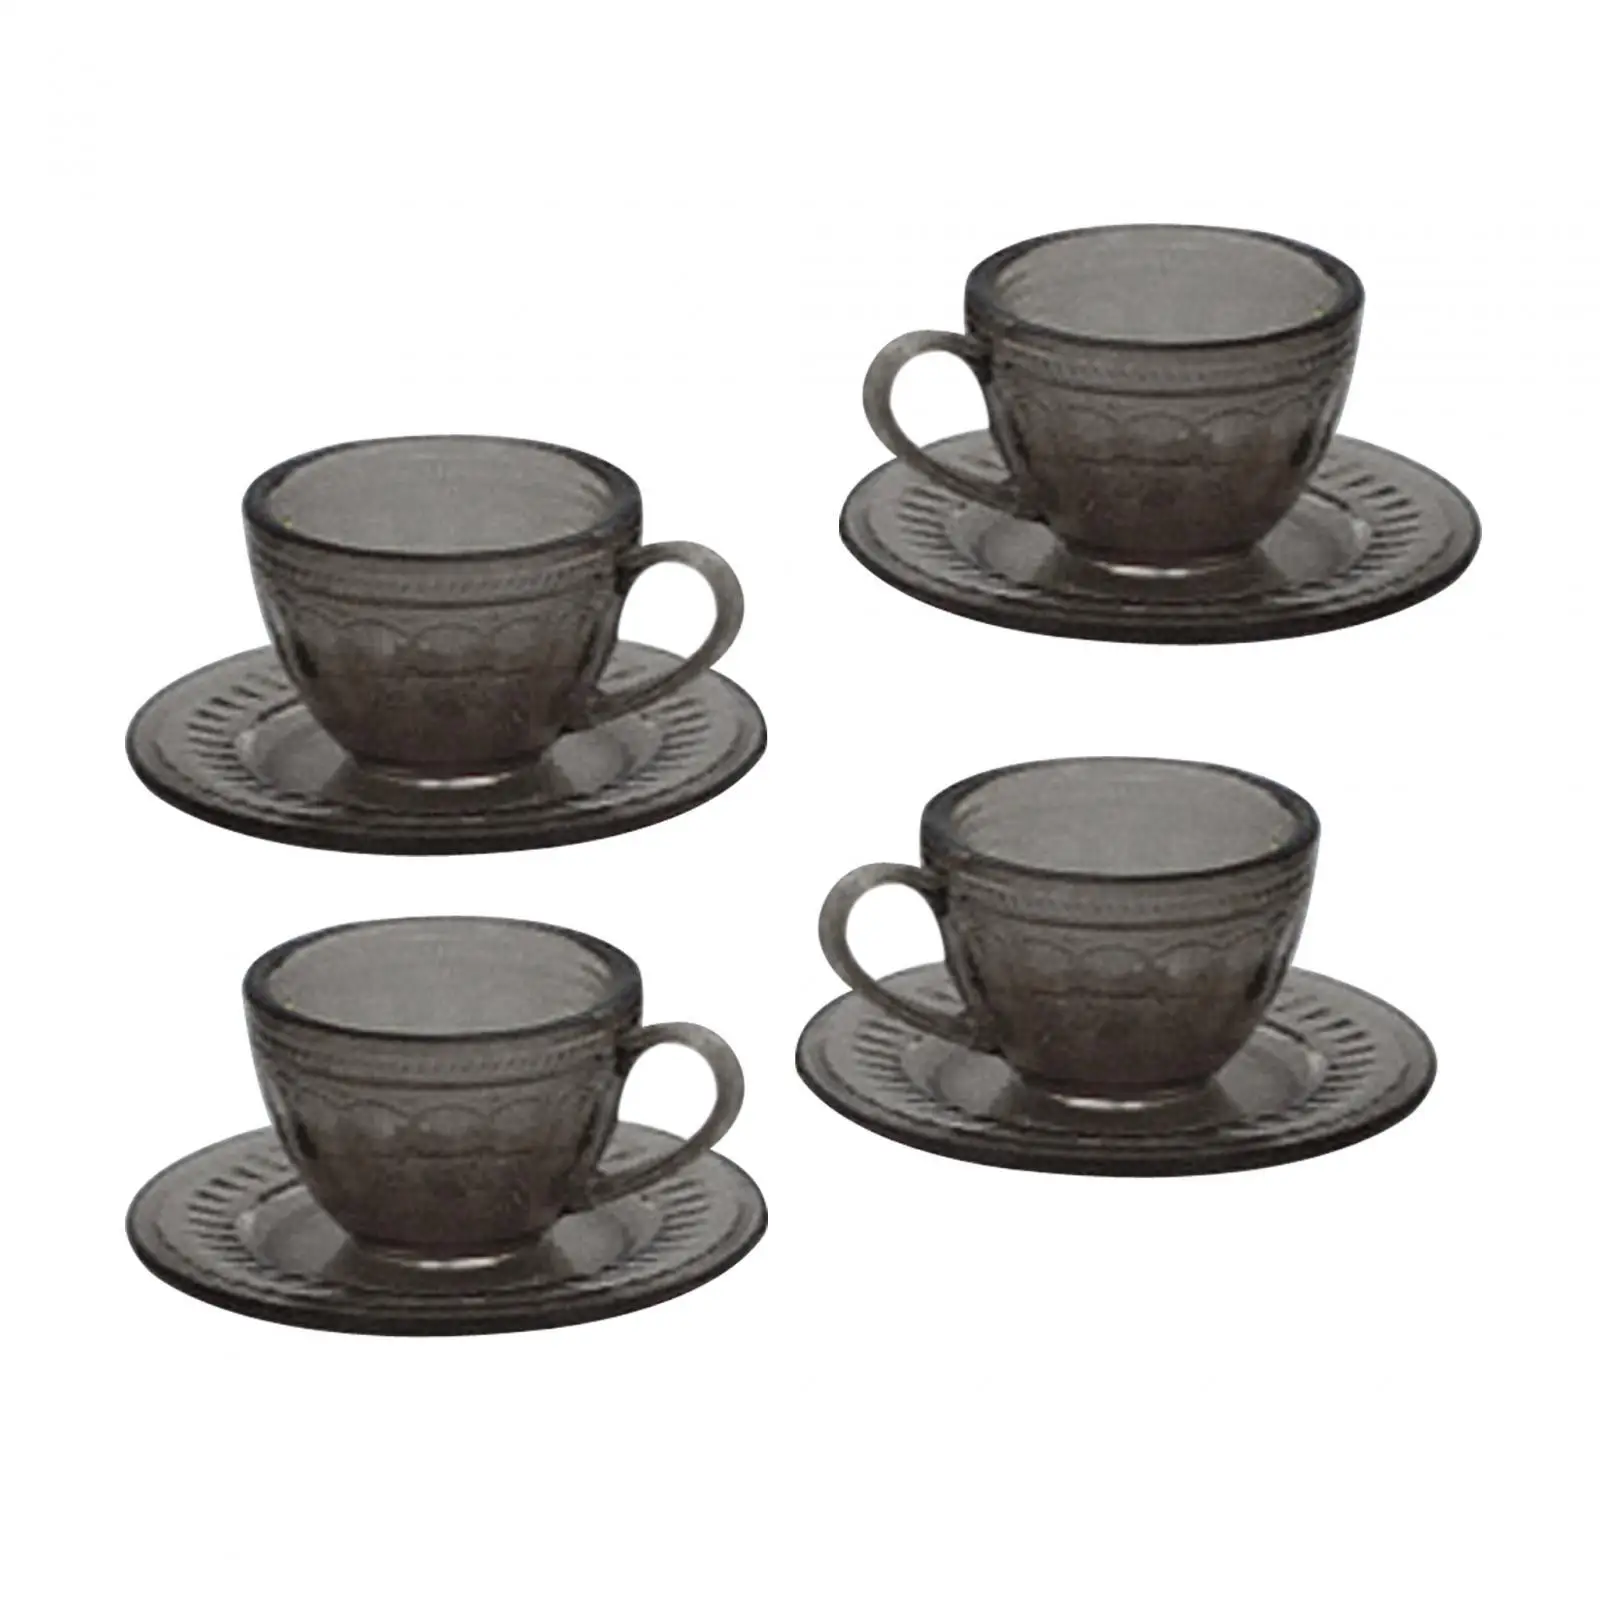 4 Pieces Dollhouse Miniature Tea Water Cup Set Kitchen Accessories 1/6 Scale Mini Tableware for Kitchen Photo Props Accessories